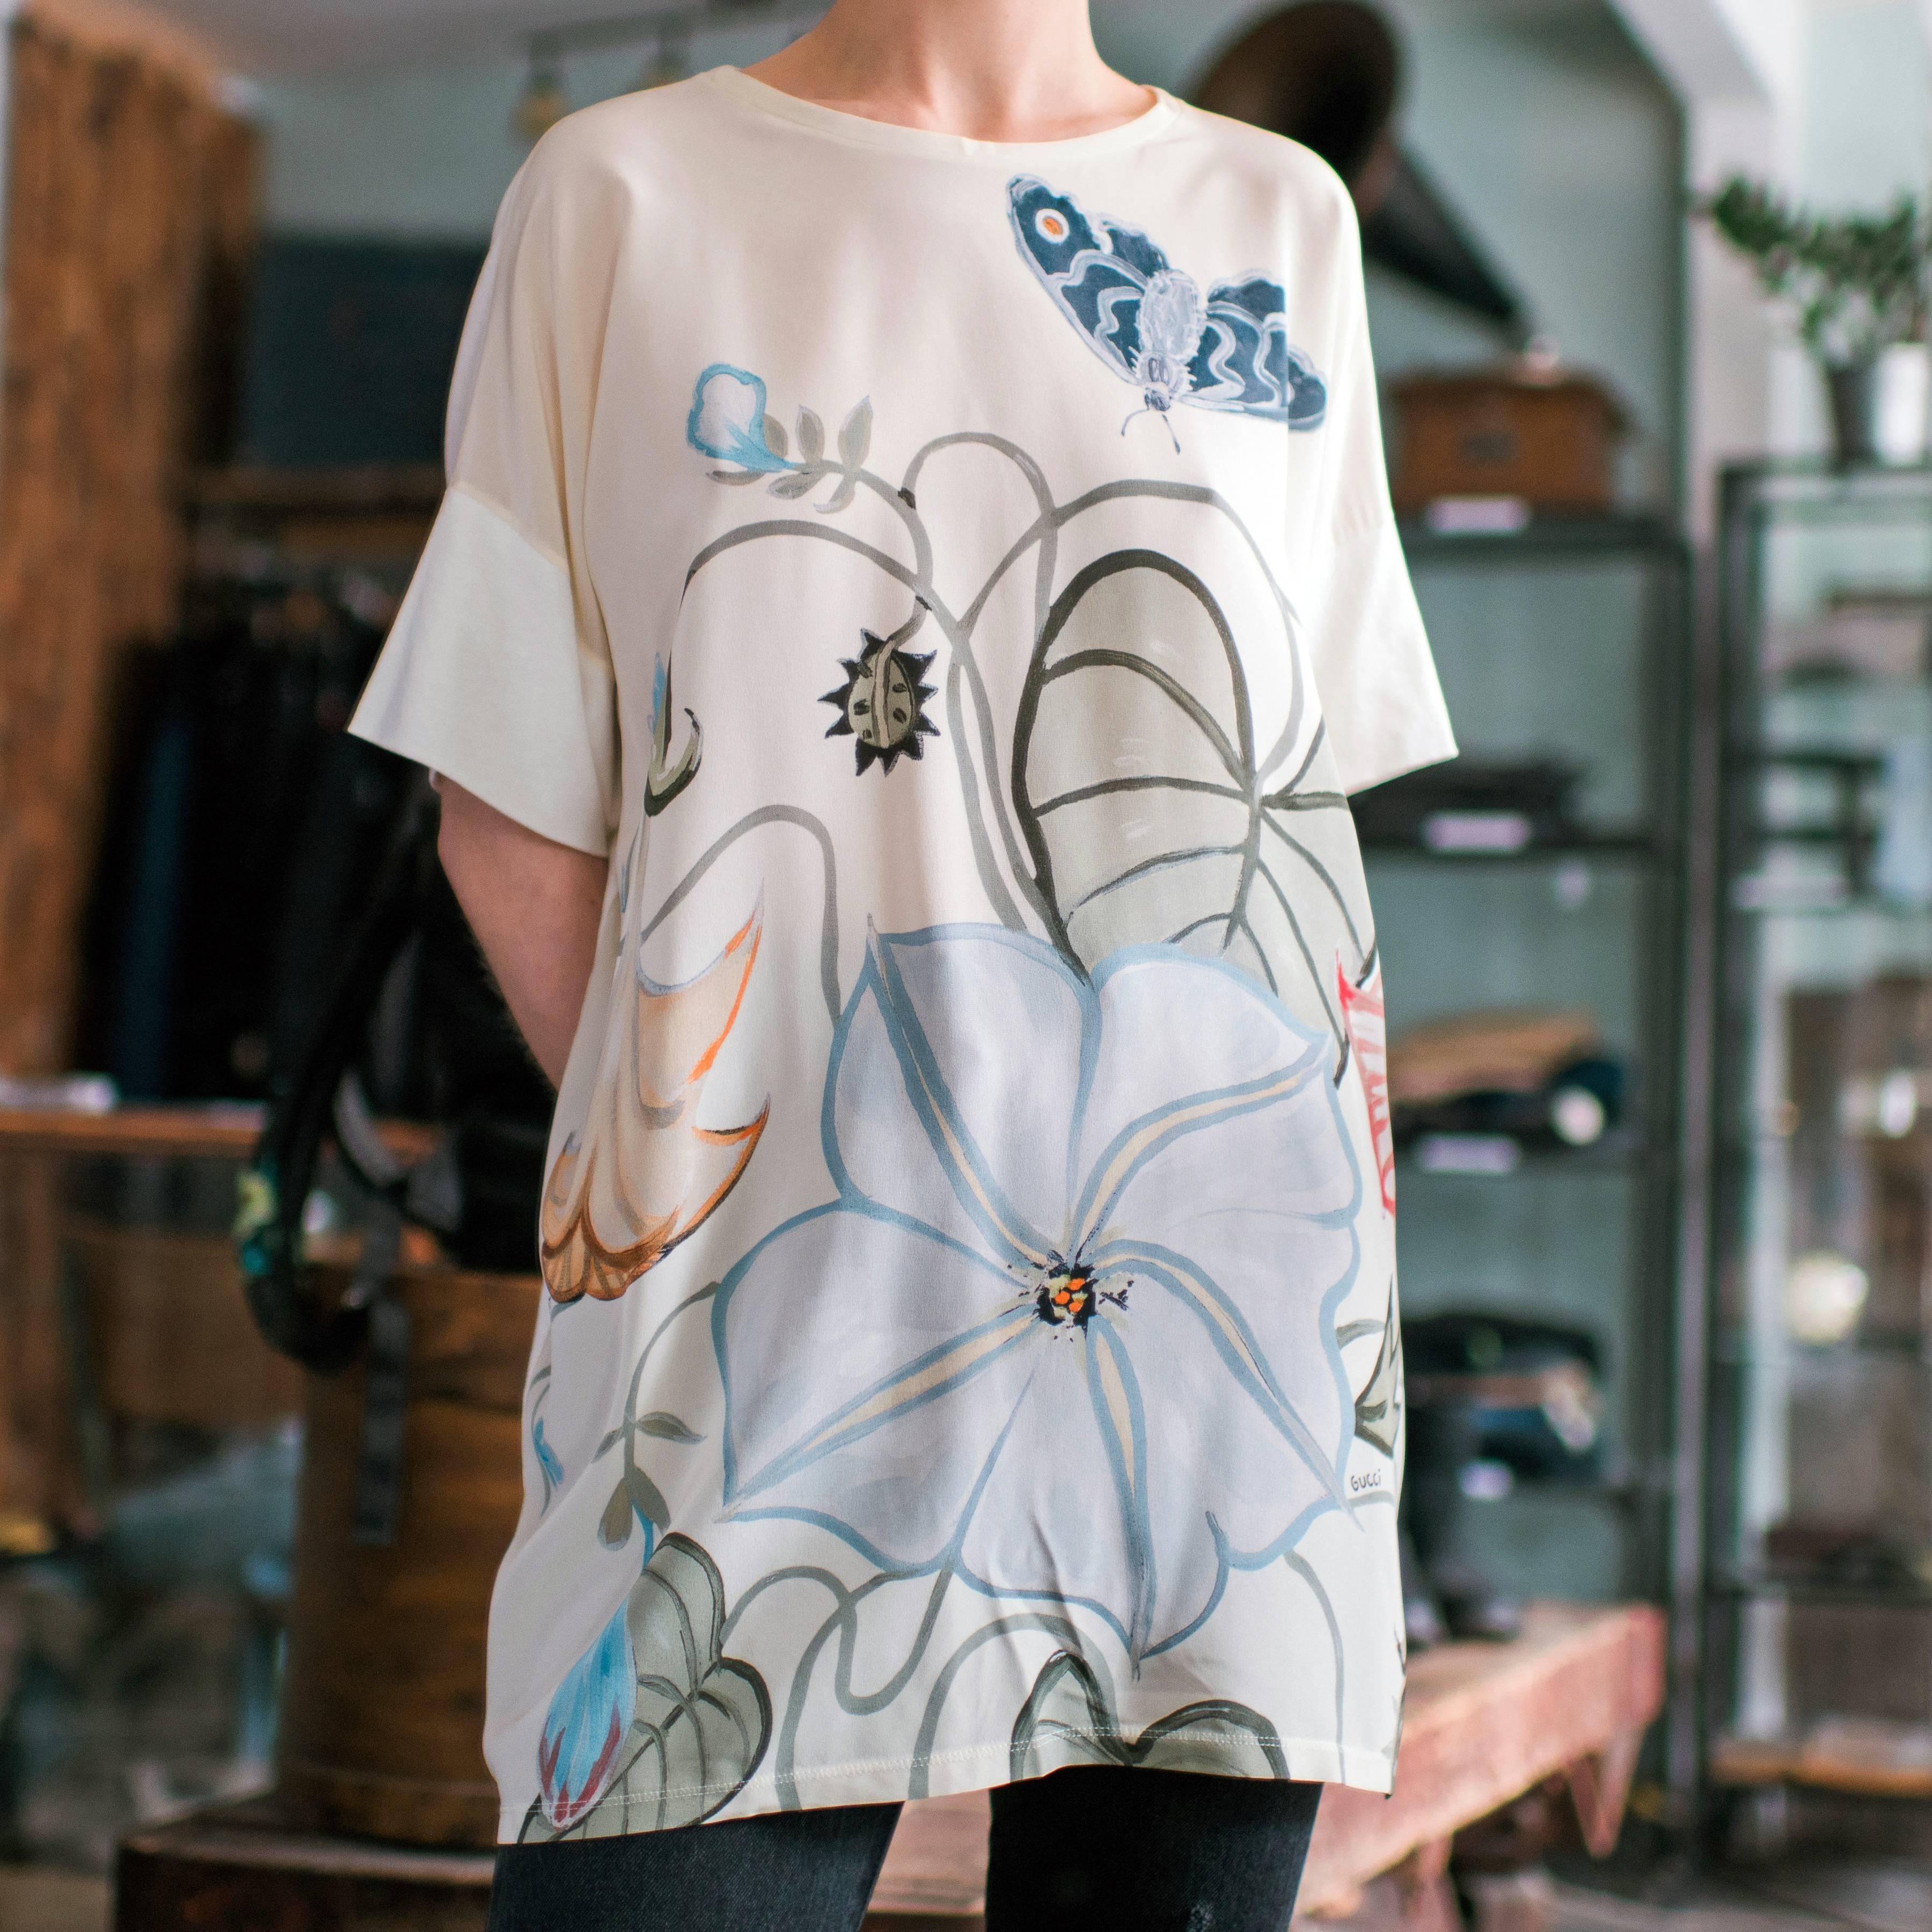 Gucci collaborated with artist Kris Knight on their resort 2015 collection to design this floral and butterfly pattern shirt. Size tag has been removed but fits as an oversized and loose USA 6 / 8. Garment bust and hip measures 50”. Recommended for